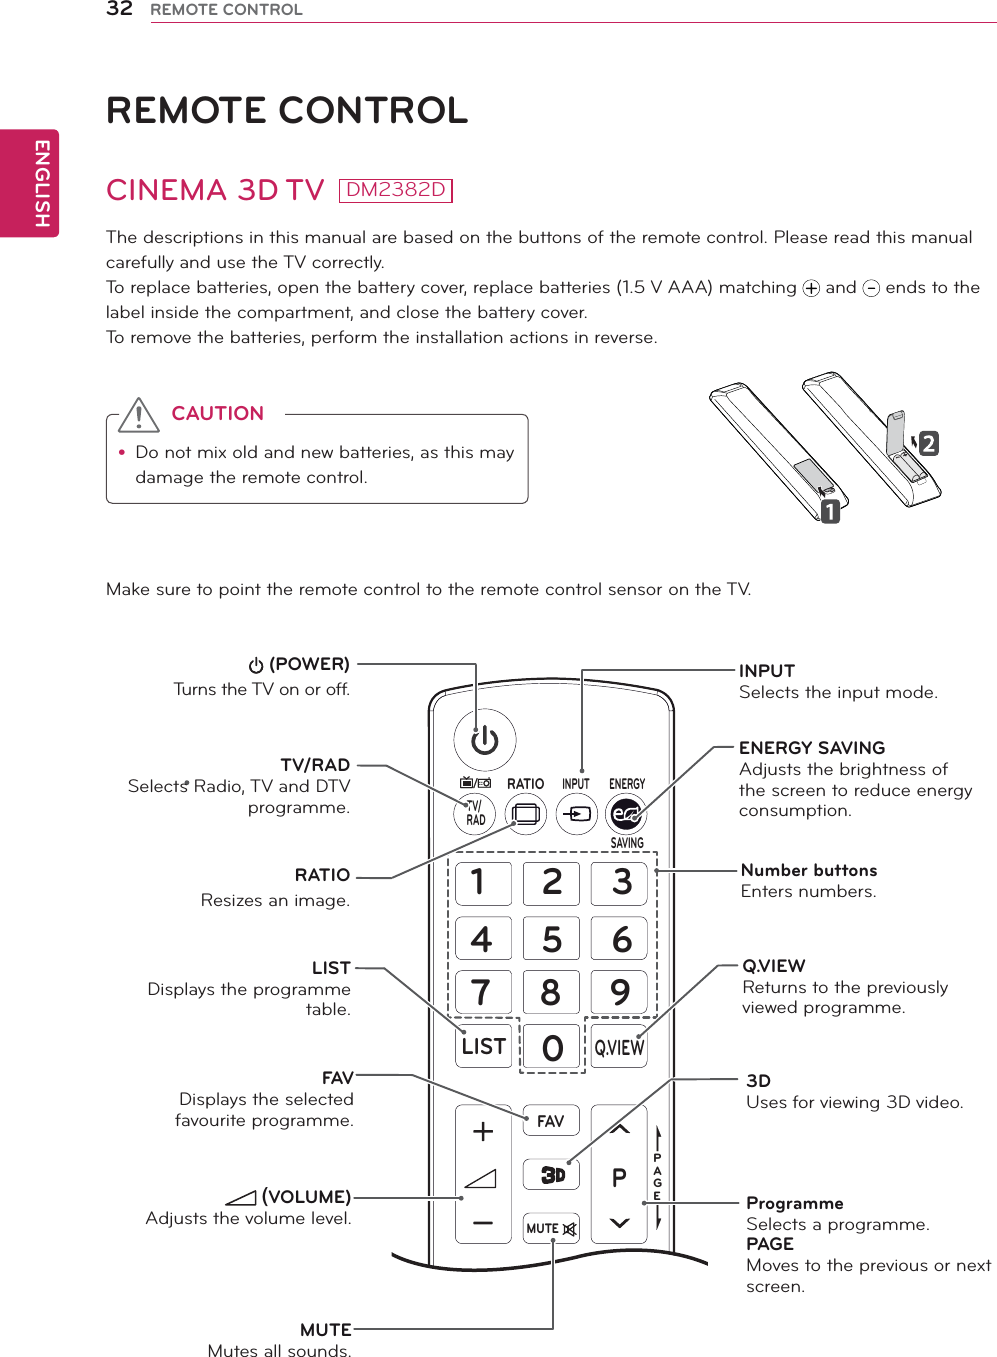 ENGLISH32 REMOTE CONTROLREMOTE CONTROLThe descriptions in this manual are based on the buttons of the remote control. Please read this manual carefully and use the TV correctly.To replace batteries, open the battery cover, replace batteries (1.5 V AAA) matching   and   ends to the label inside the compartment, and close the battery cover.To remove the batteries, perform the installation actions in reverse.Make sure to point the remote control to the remote control sensor on the TV.CAUTIONy Do not mix old and new batteries, as this may damage the remote control.1234506789LISTQ.VIEWSETTINGSQ MENUPAGEPFAVMUTEINFORATIOINPUTTV/RADENERGYSAVING3D OPTION (POWER)Turns the TV on or off.LISTDisplays the programme table.INPUTSelects the input mode.TV/RADSelects Radio, TV and DTV programme.Number buttonsEnters numbers.Q.VIEWReturns to the previously viewed programme. FAVDisplays the selected favourite programme.3DUses for viewing 3D video.RATIOResizes an image.Programme Selects a programme.PAGE Moves to the previous or next screen.MUTEMutes all sounds.ENERGY SAVINGAdjusts the brightness of the screen to reduce energy consumption. VOLUME)Adjusts the volume level.CINEMA 3D TV DM2382D